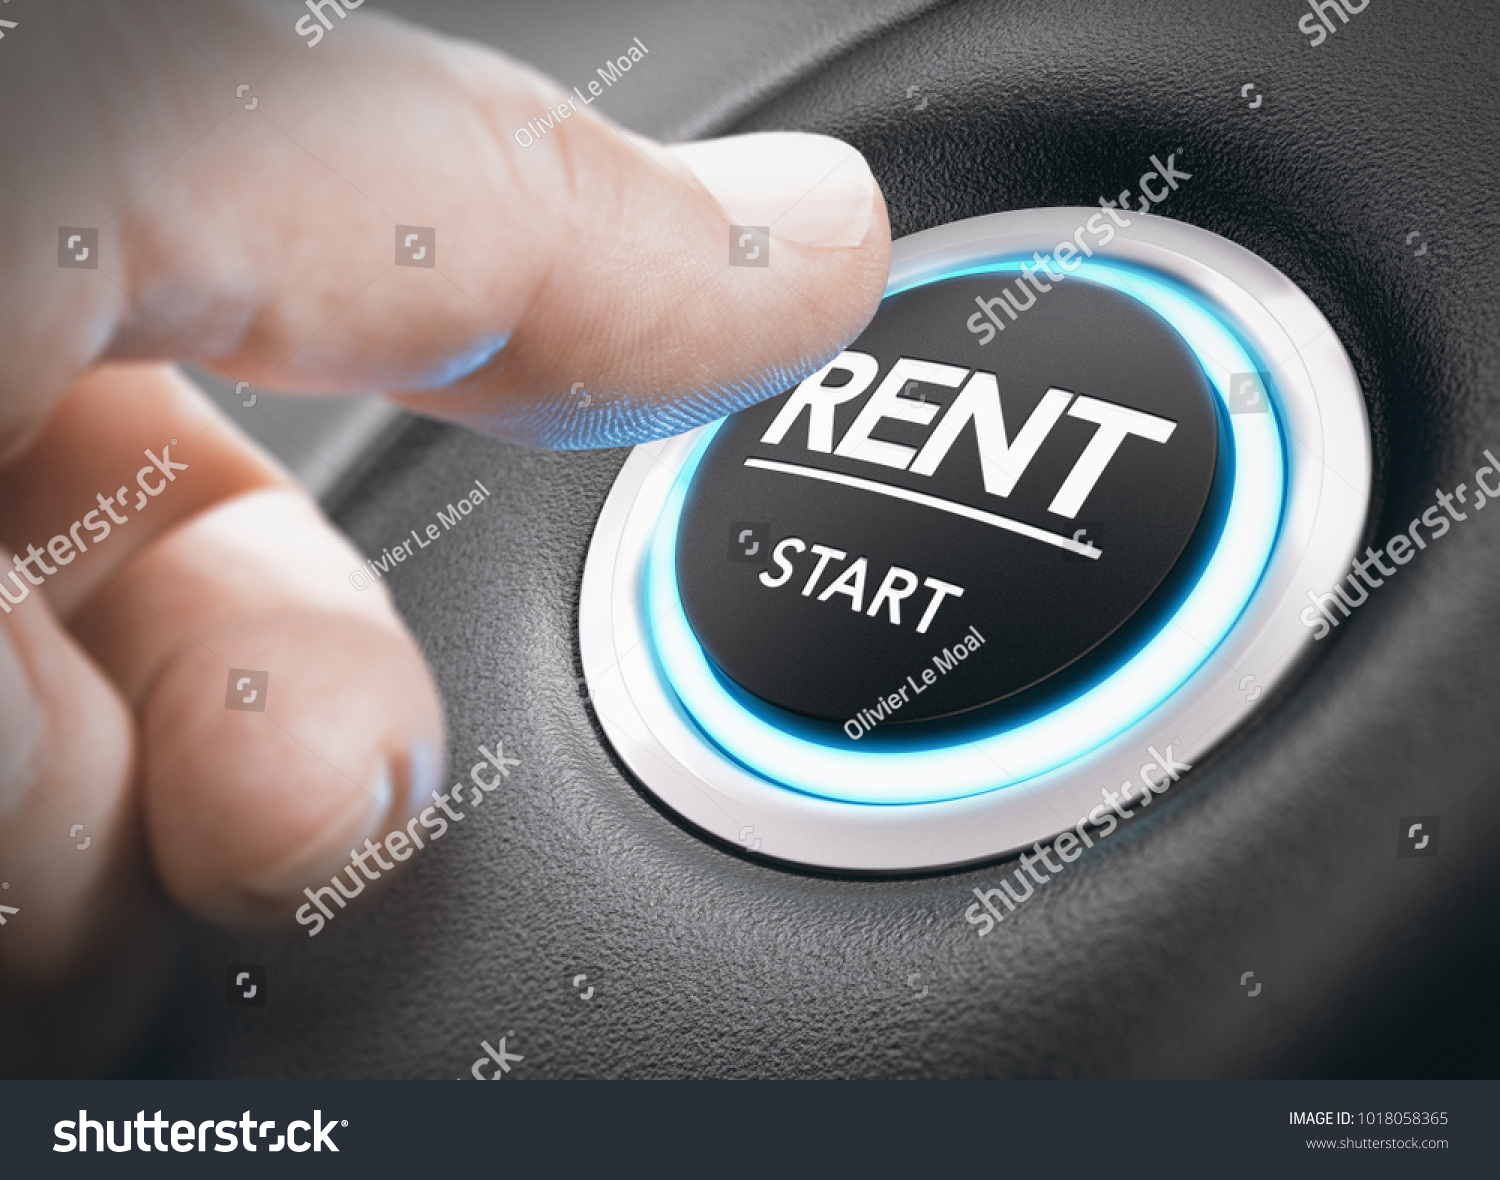 Man pushing a start button with the word rent. concept of car or vehicle rental. Composite image between a hand photography and a 3D background. #1018058365